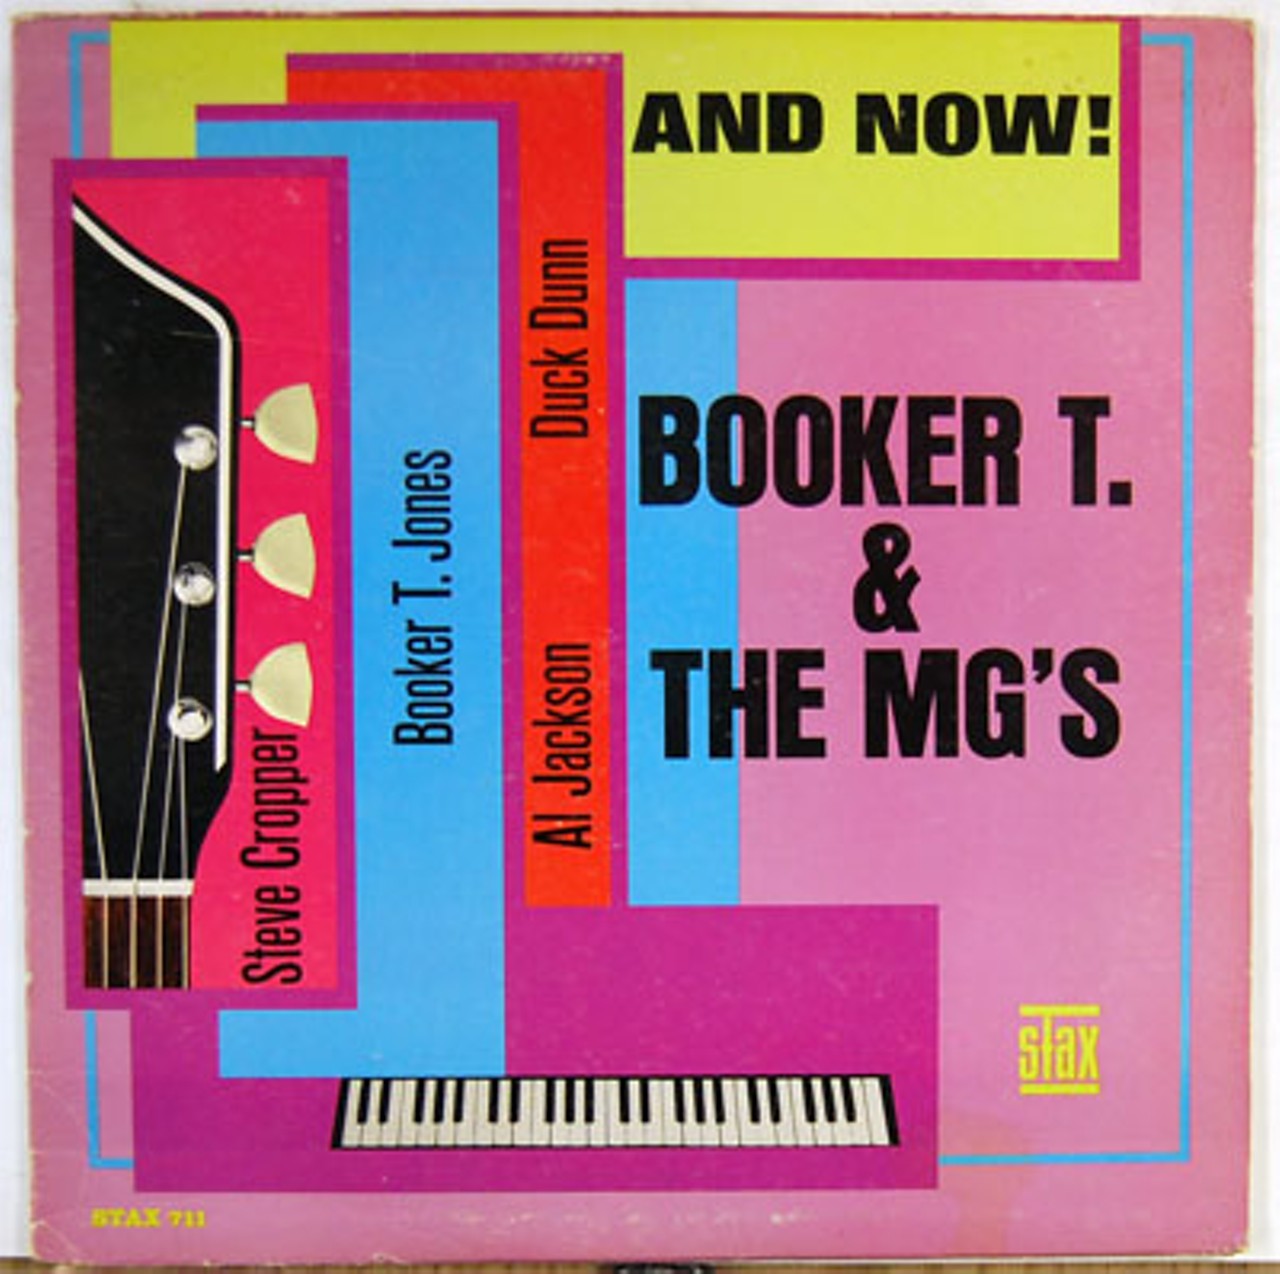 Another Booker T and the M.G.'s LP.Read "Voices Carry: Shirley Brown, the forgotten soul sister, sings on," by Roy Kasten.